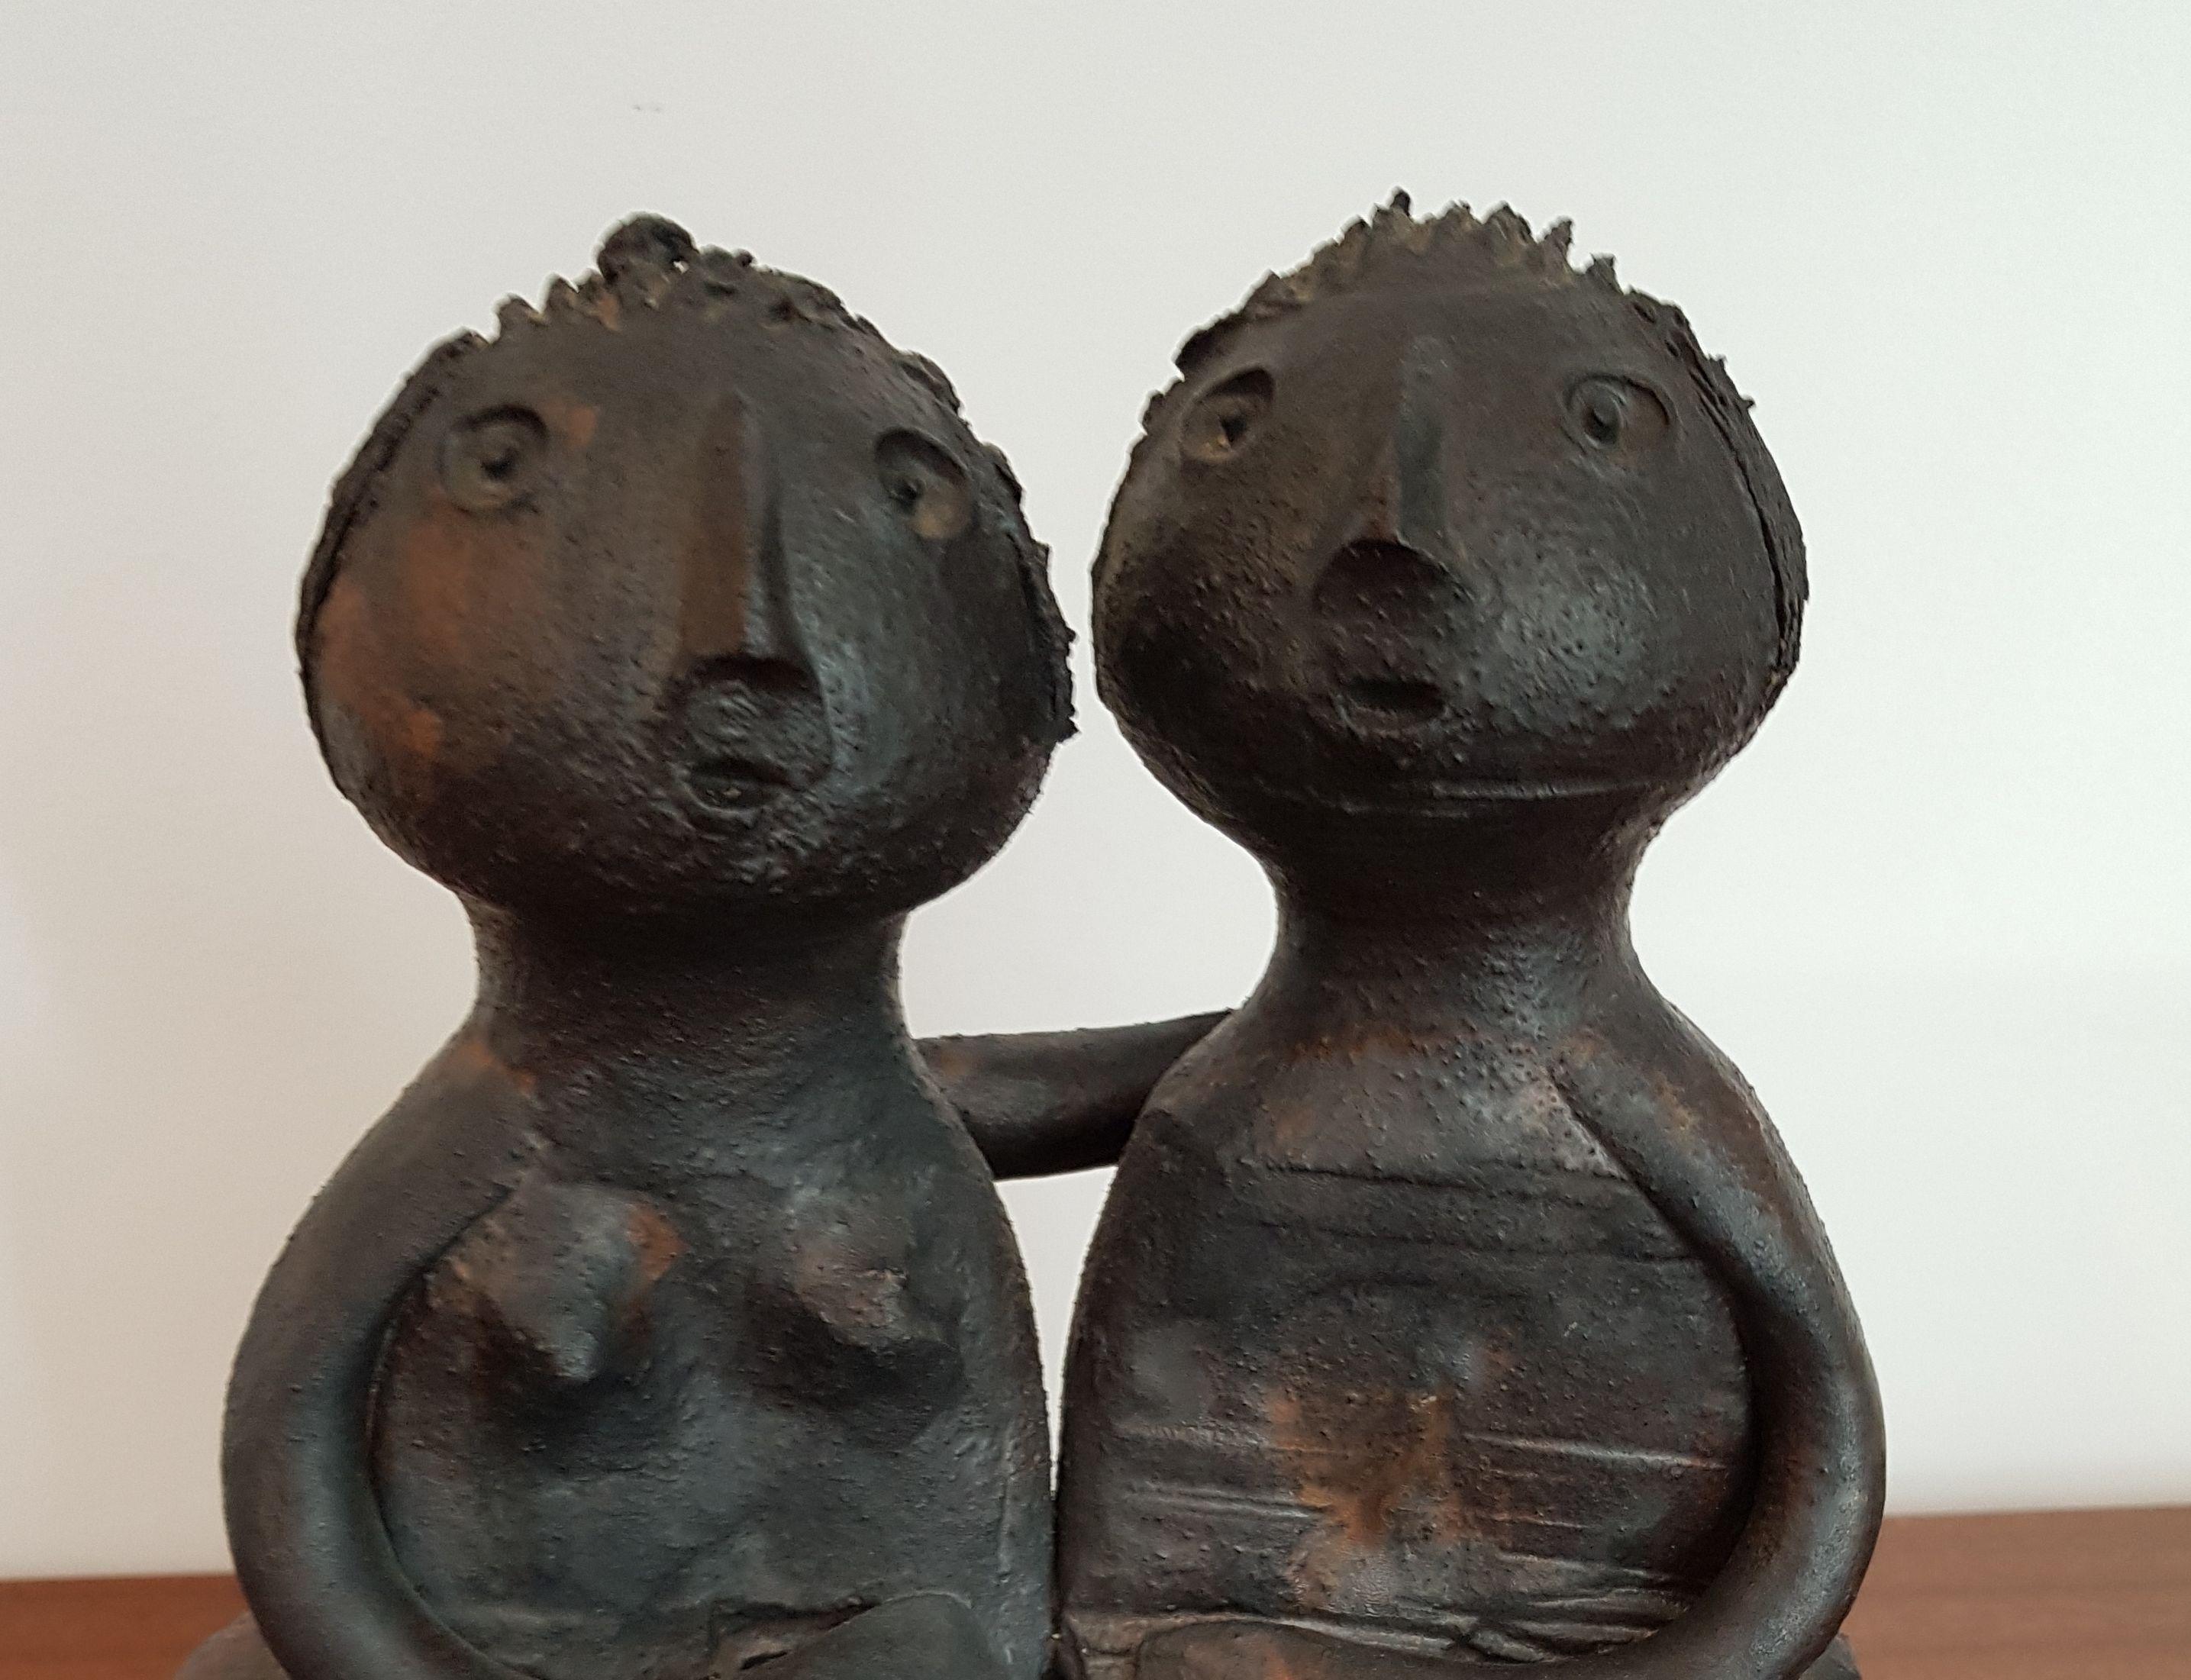 Matt glazed sculptural group of man and woman, signed Dominic Pouchain.